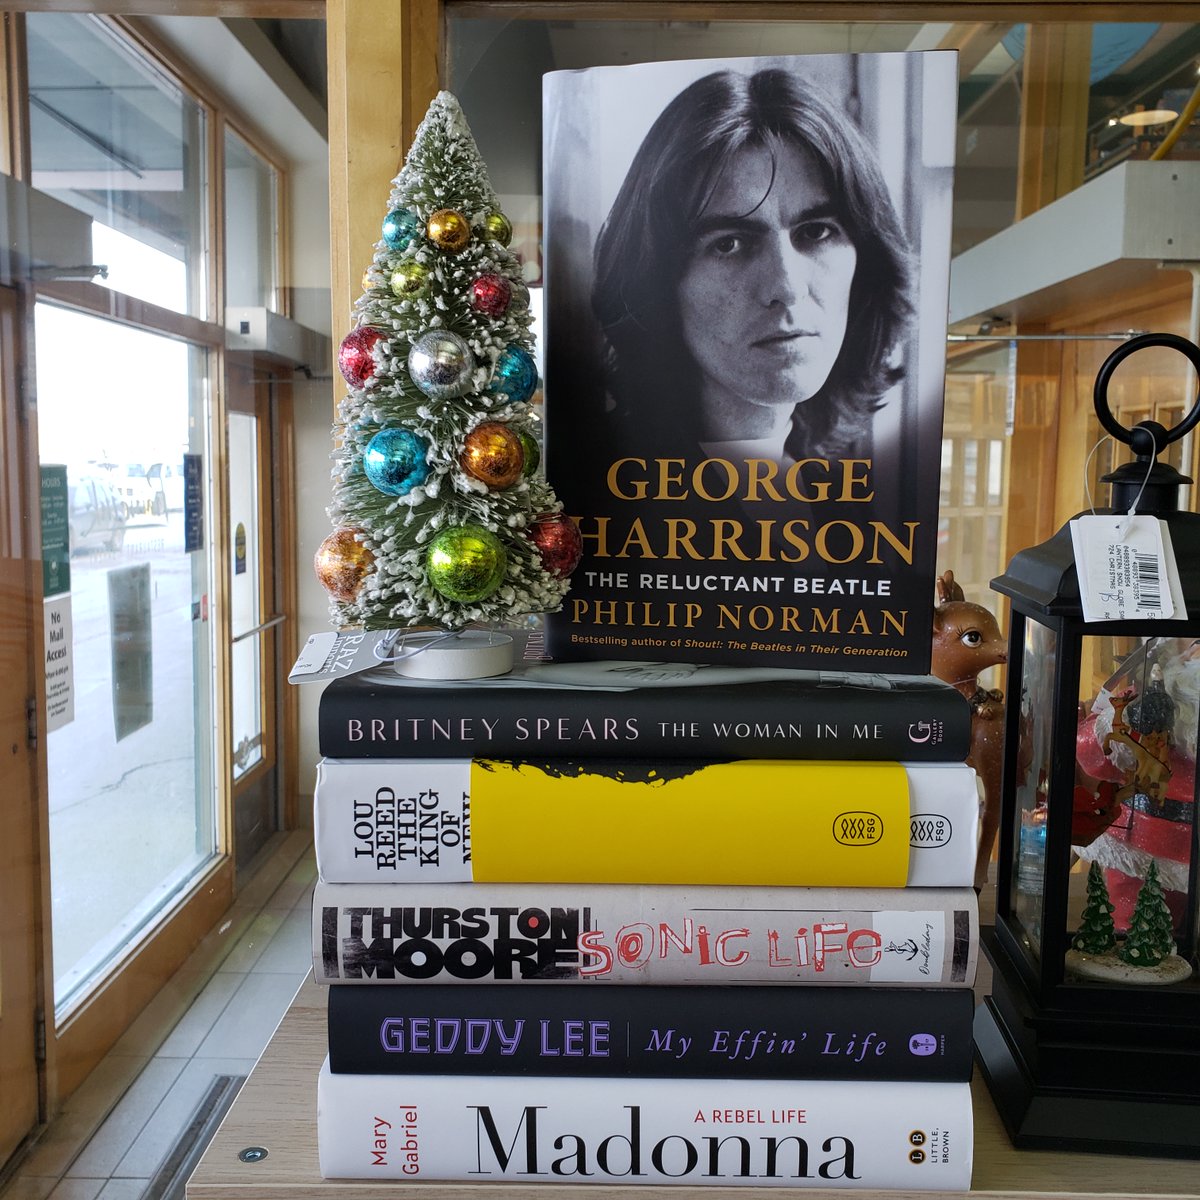 Are you a music nerd? Or have you got one on your holiday gift list? Then we've got the latest greatest music biographies to entertain and inform. From rock masters like George Harrison to Lou Reed, and pop icons like Madonna and Britney. Something for everybody!